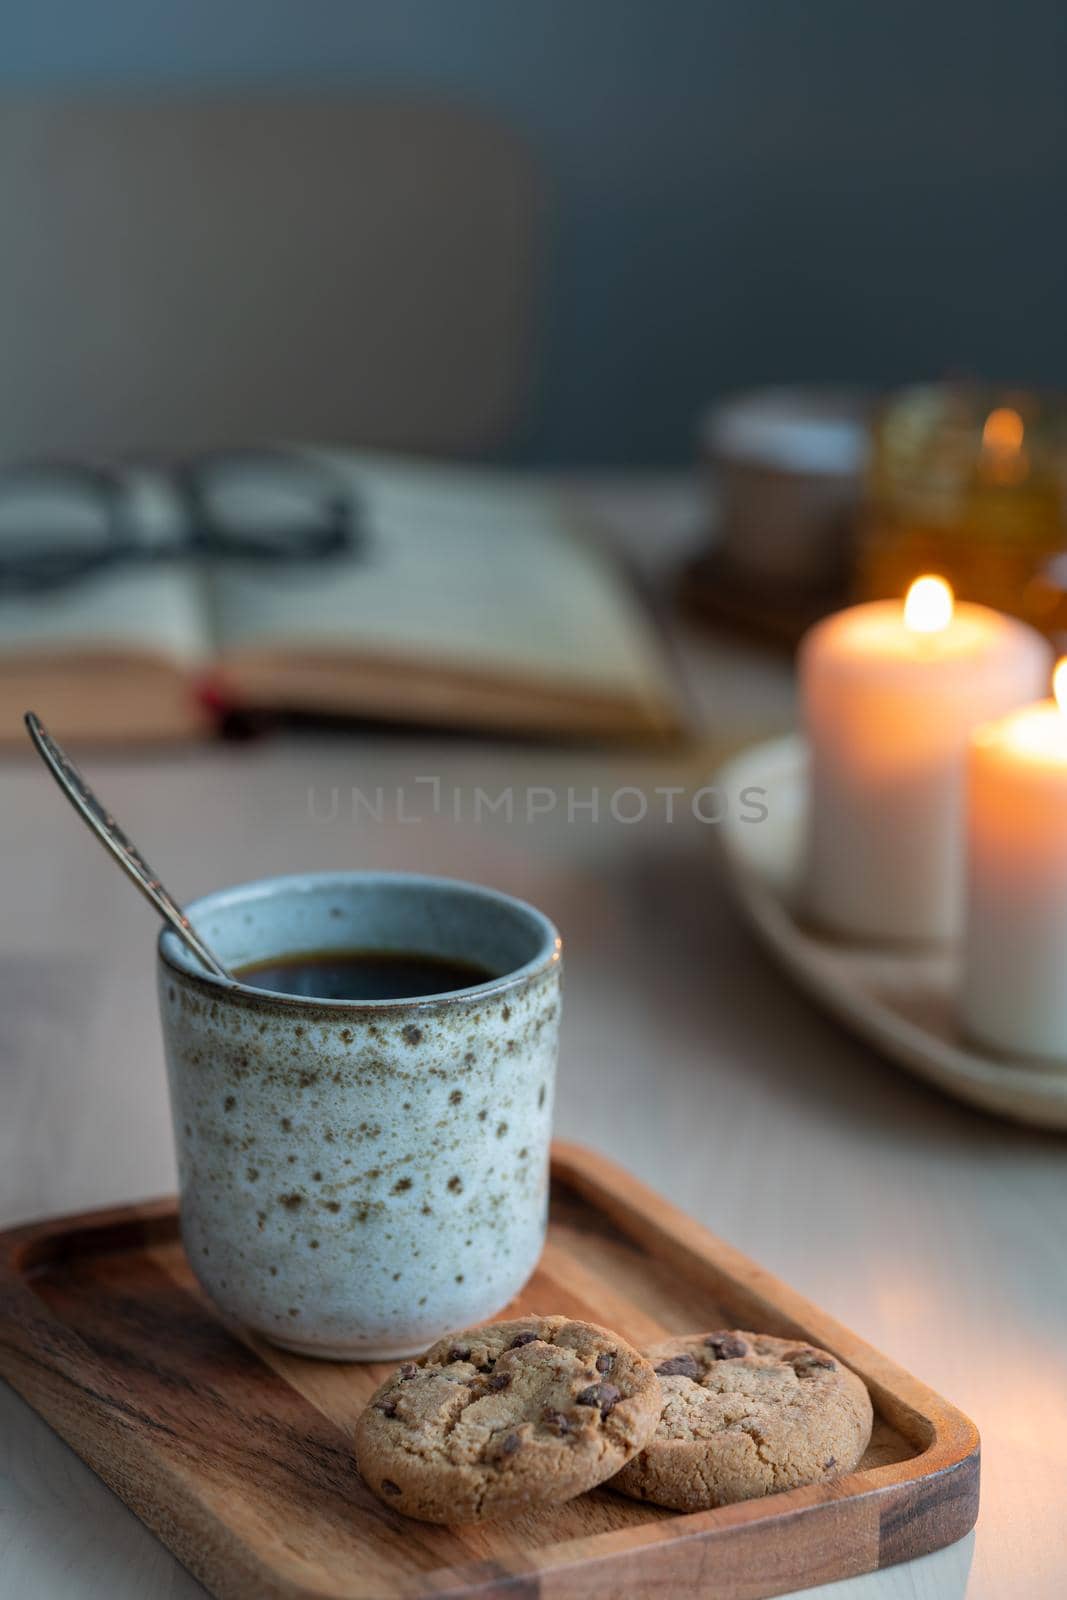 Cozy background with book, chocolate chip cookies, cup of tea. Sunday evening, mug of drink, holiday decorations, candles lights bokeh. Vertical still life twilight